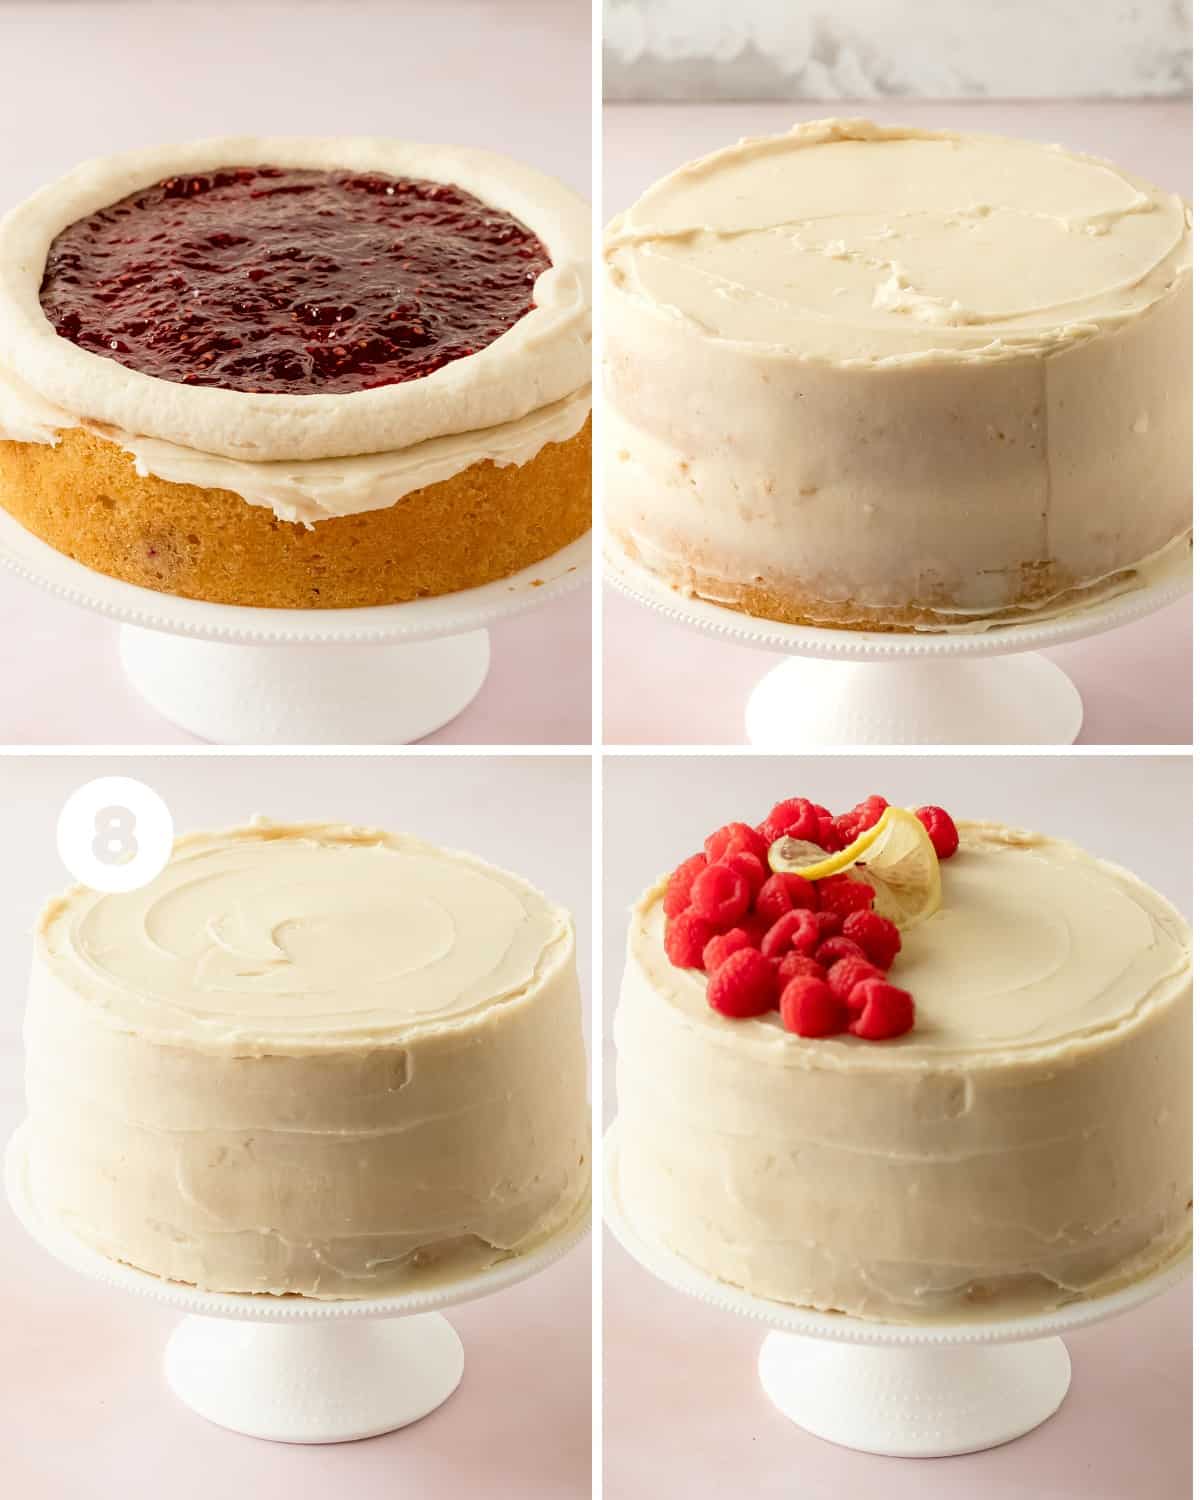 Finish and serve: Apply the rest of the lemon cream cheese frosting to the raspberry filled cake. Place the cake in the fridge to set for about 20 - 30 minutes if the frosting is very soft. When you are ready to serve, top the cake with fresh raspberries and slices of lemon if you like.